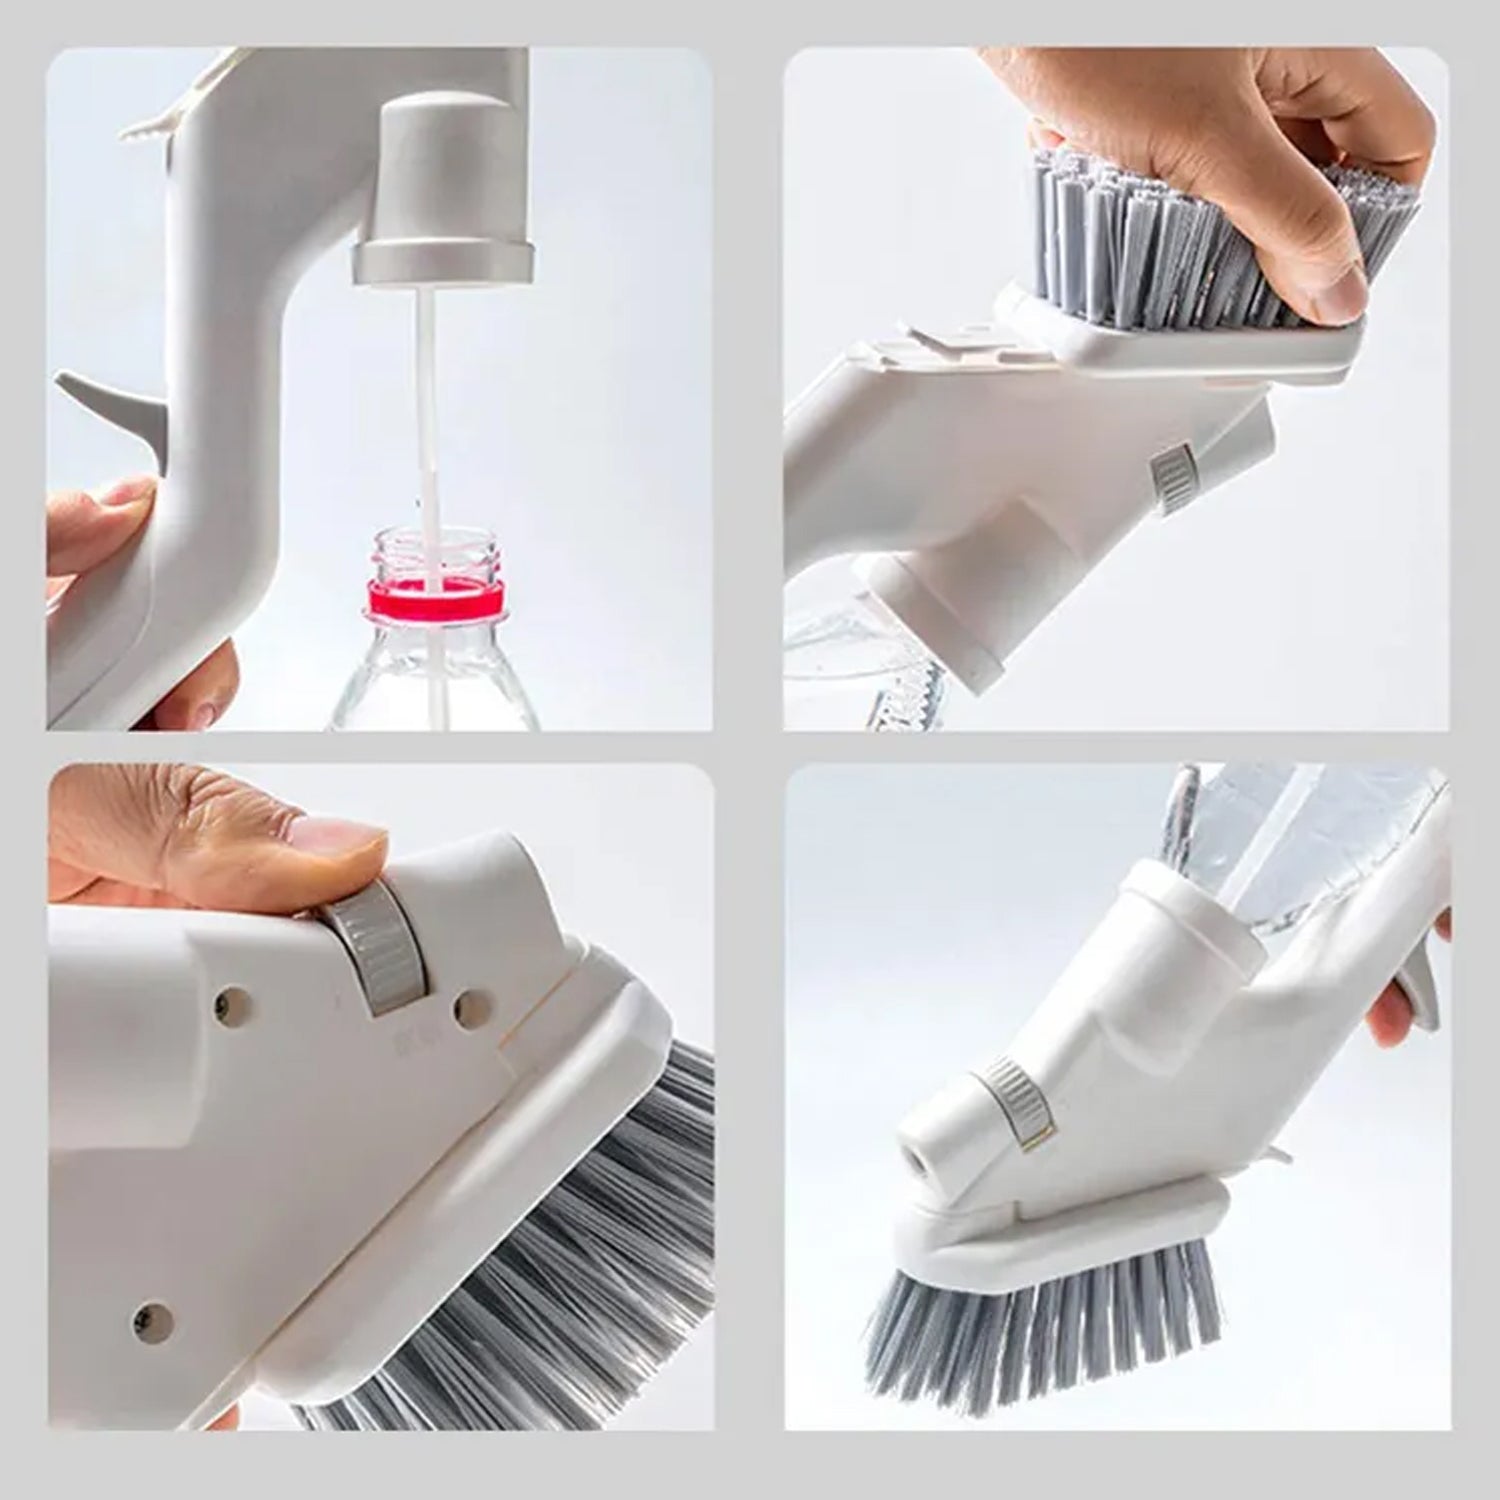 6699 Spray Cleaning Brush, Multifunction Non-Slip Cleaning Brush, Comfortable Handle Durable for Sinks, Gas Stove Clean Tiles Crevices, Window Household Cleaning DeoDap